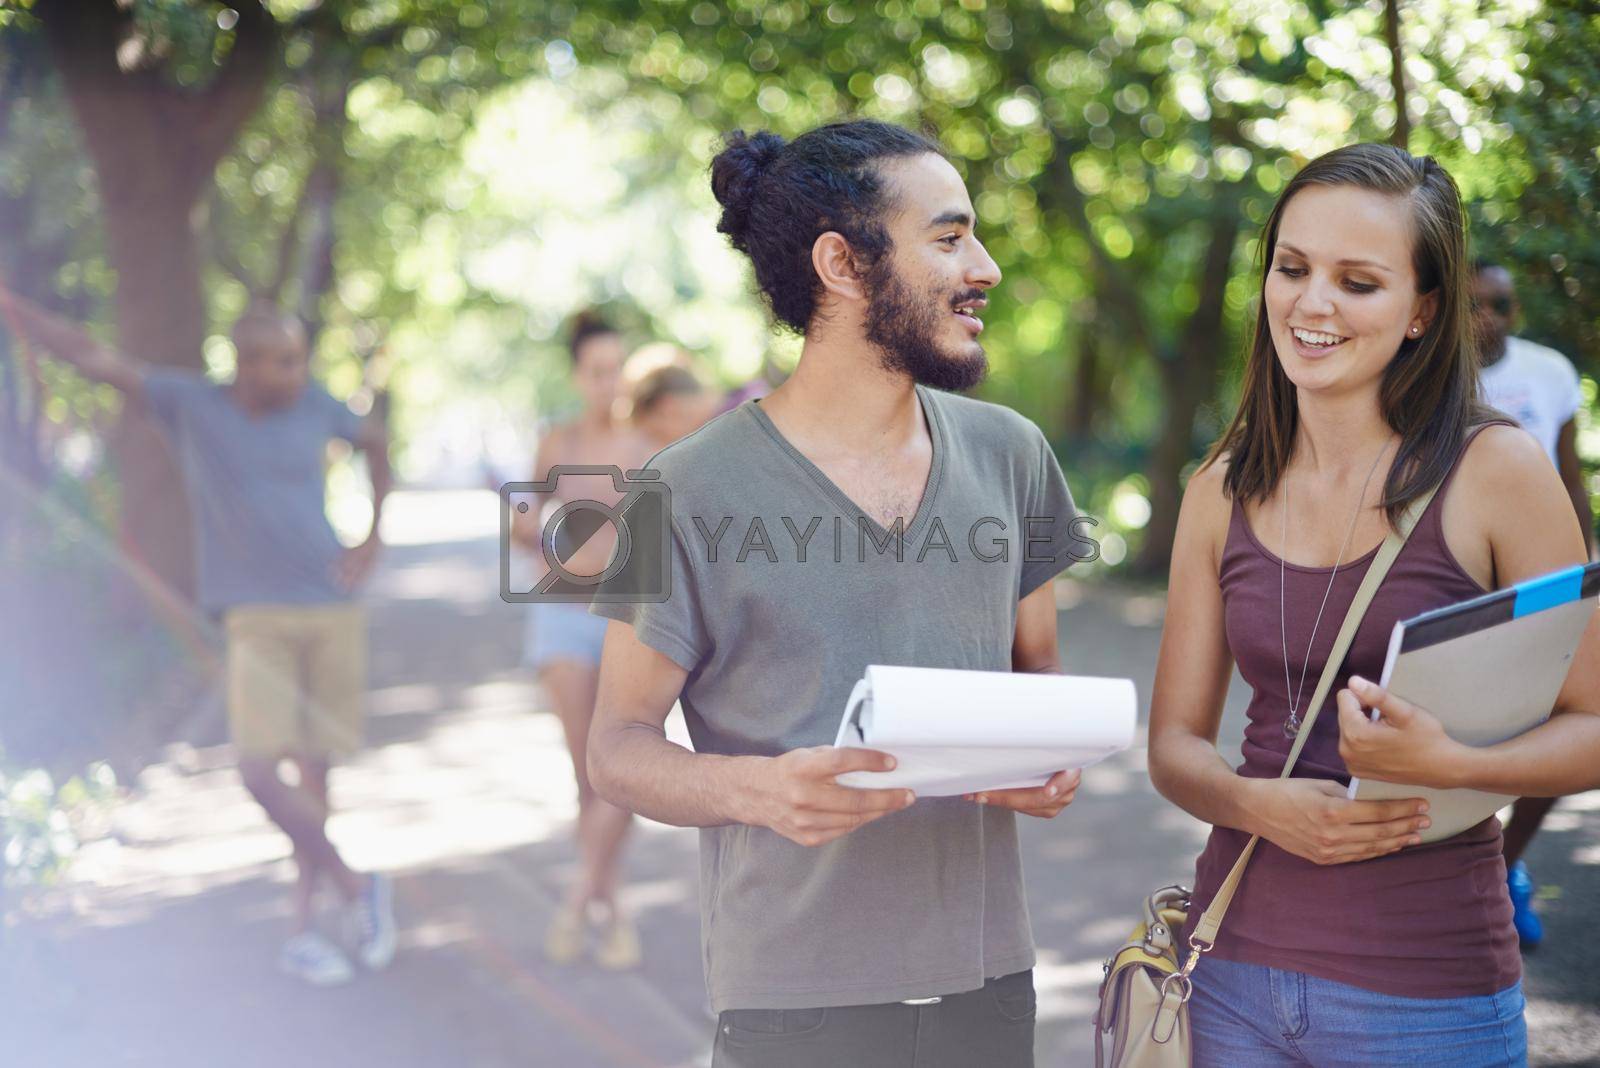 Royalty free image of Chatting in between classes. a male and female student chatting on campus. by YuriArcurs